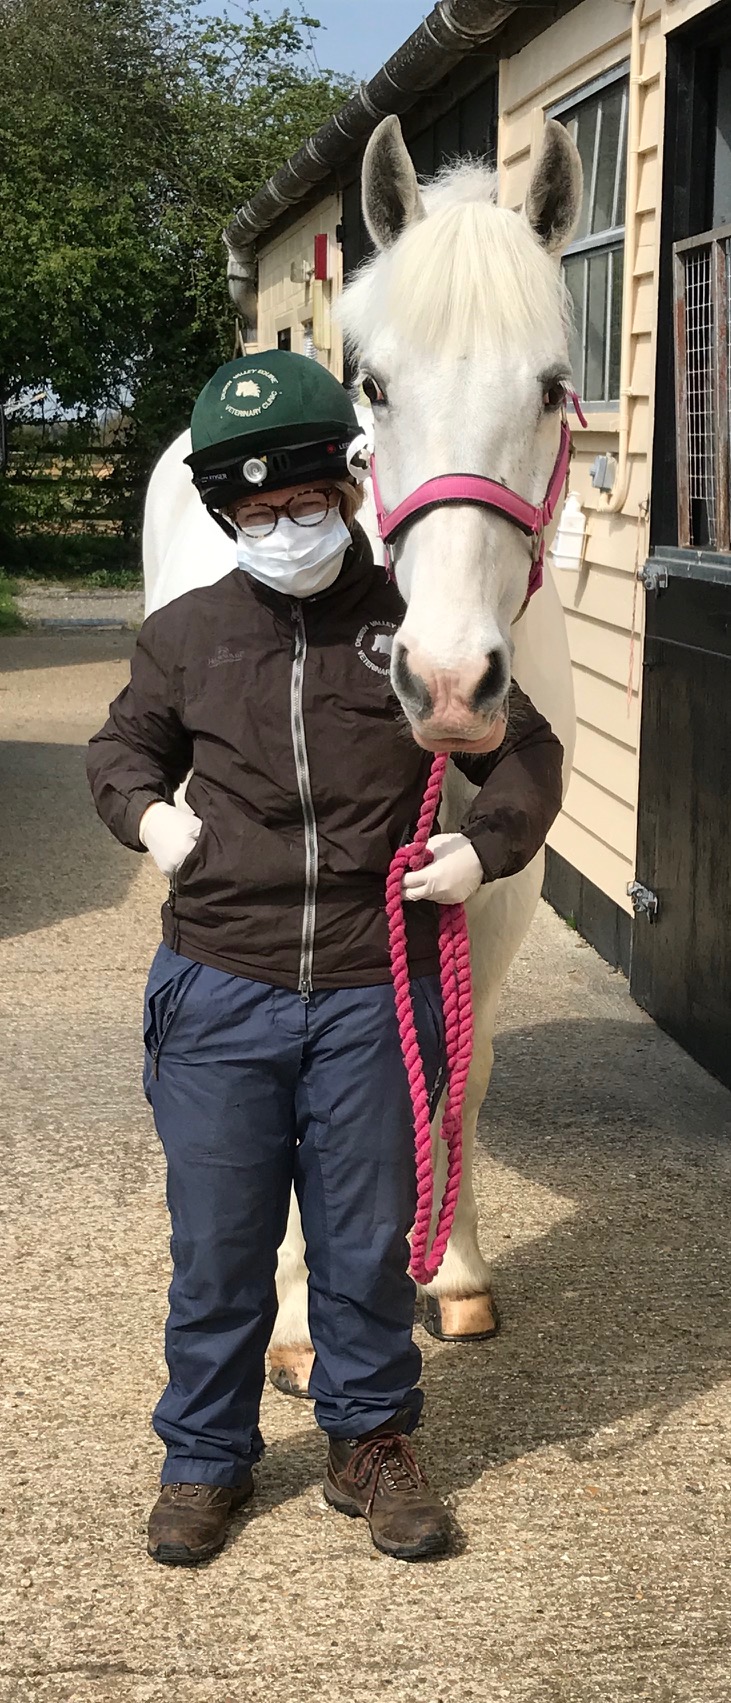 Fortunately the horses really don't seem to mind the gloves or masks.  It makes me feel like a very unfriendly vet, so sorry but I will be smiling under that mask some of the time!